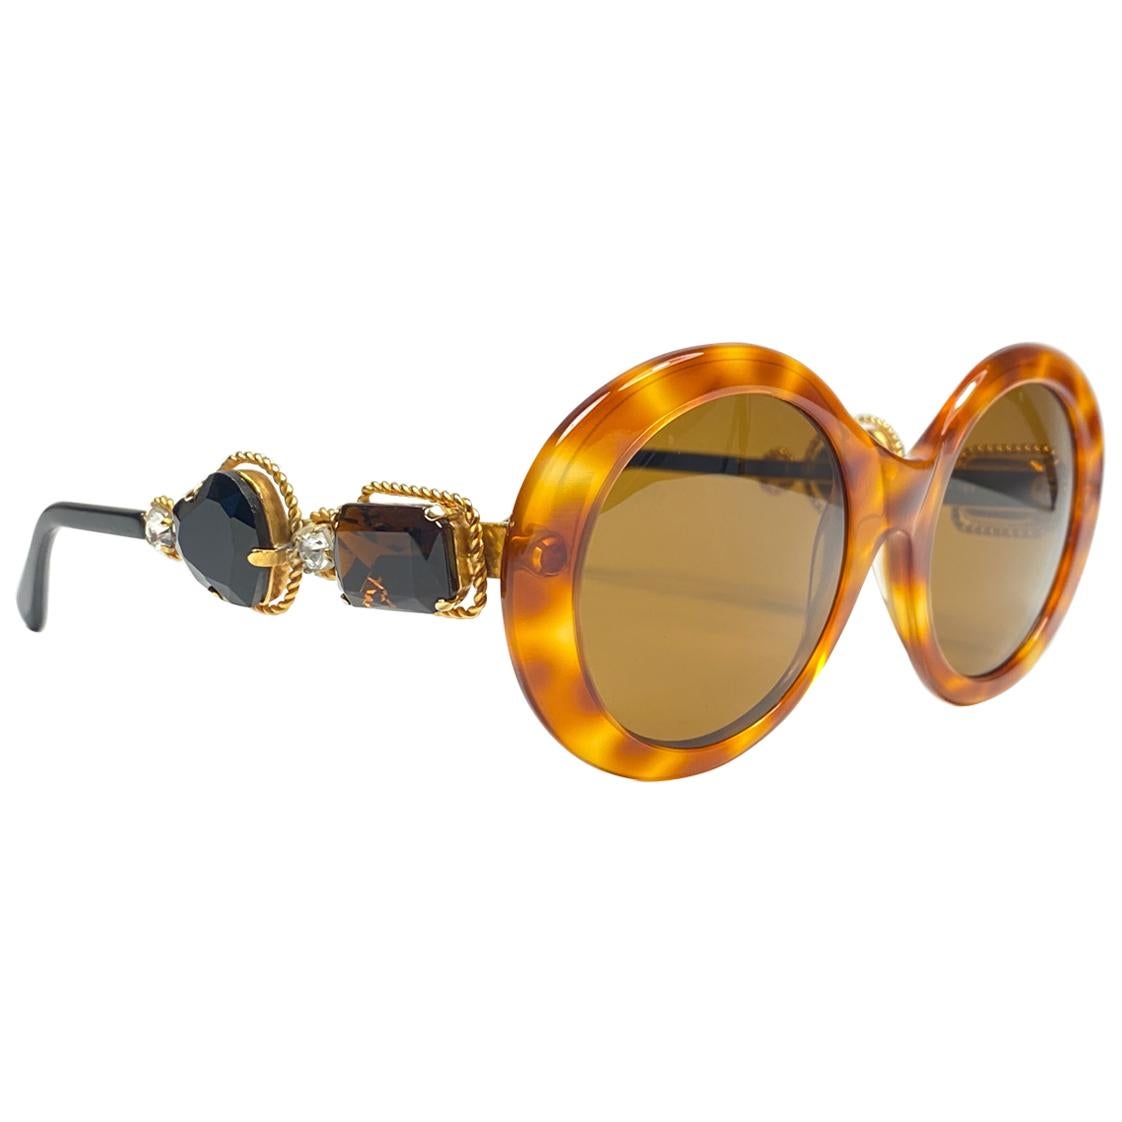 Moschino By Persol M253 Vintage Tortoise Jewelled Lady Gaga Sunglasses, 1990 